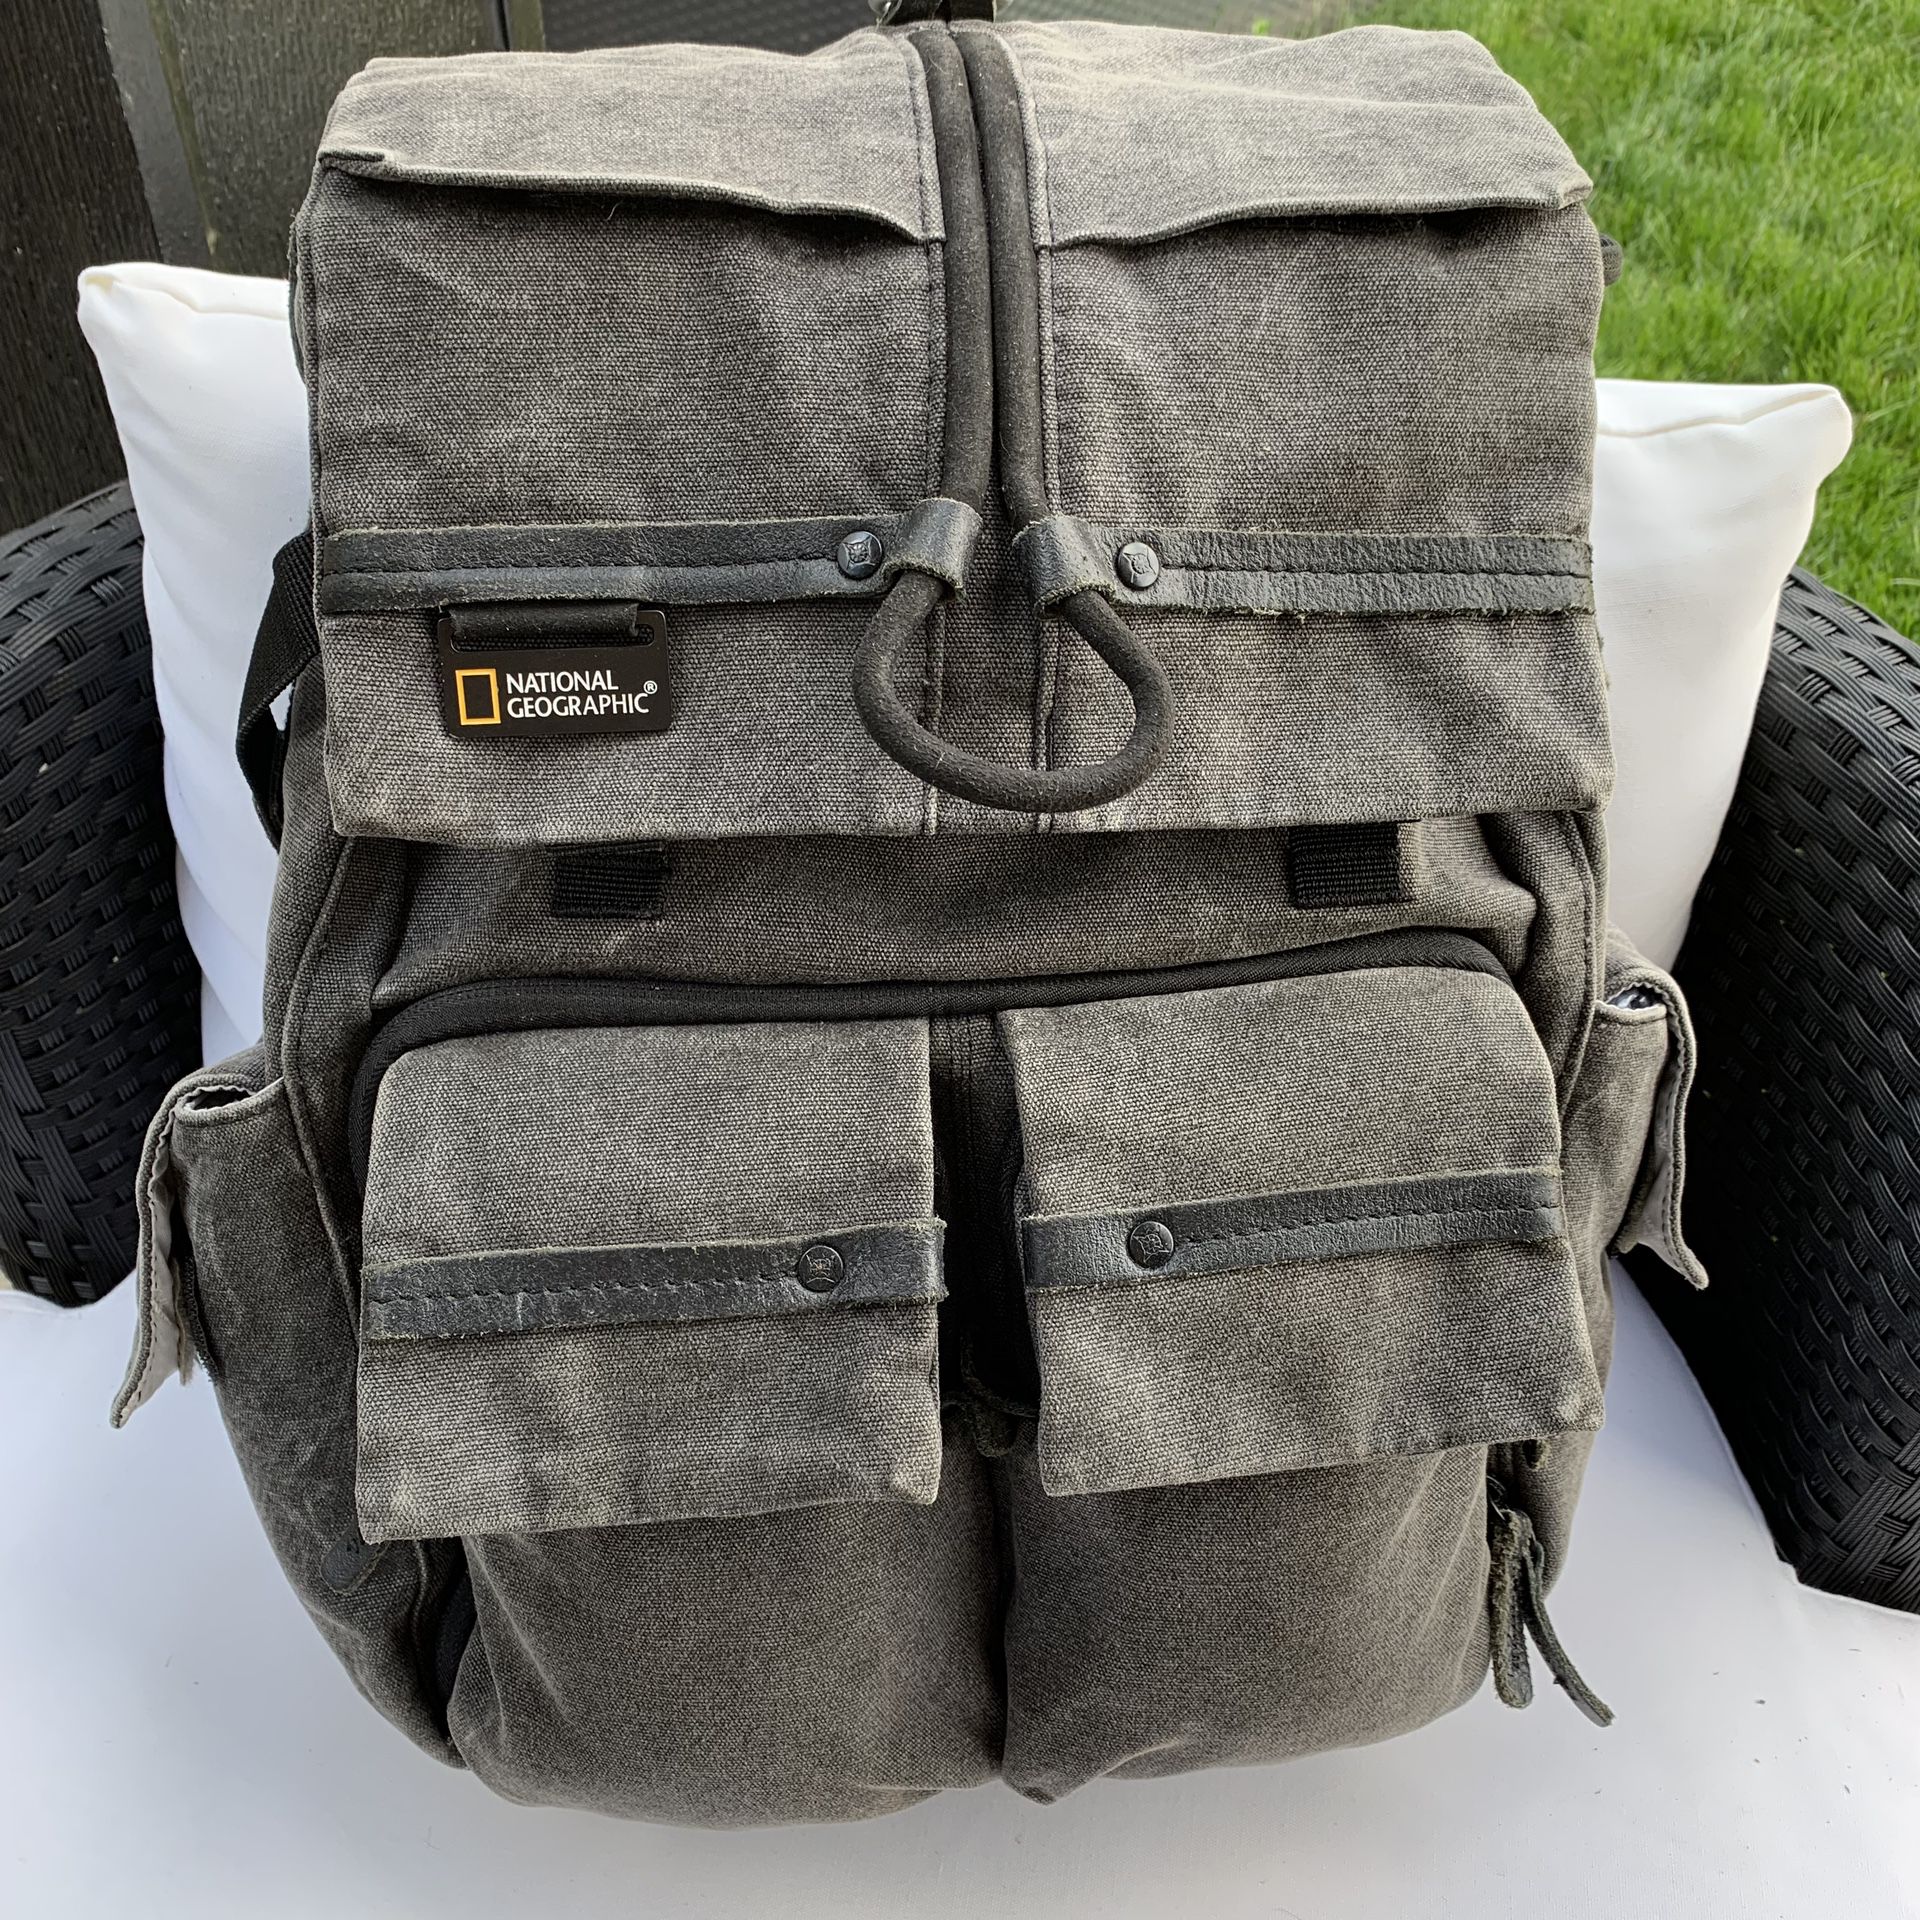 National Geographic Backpack